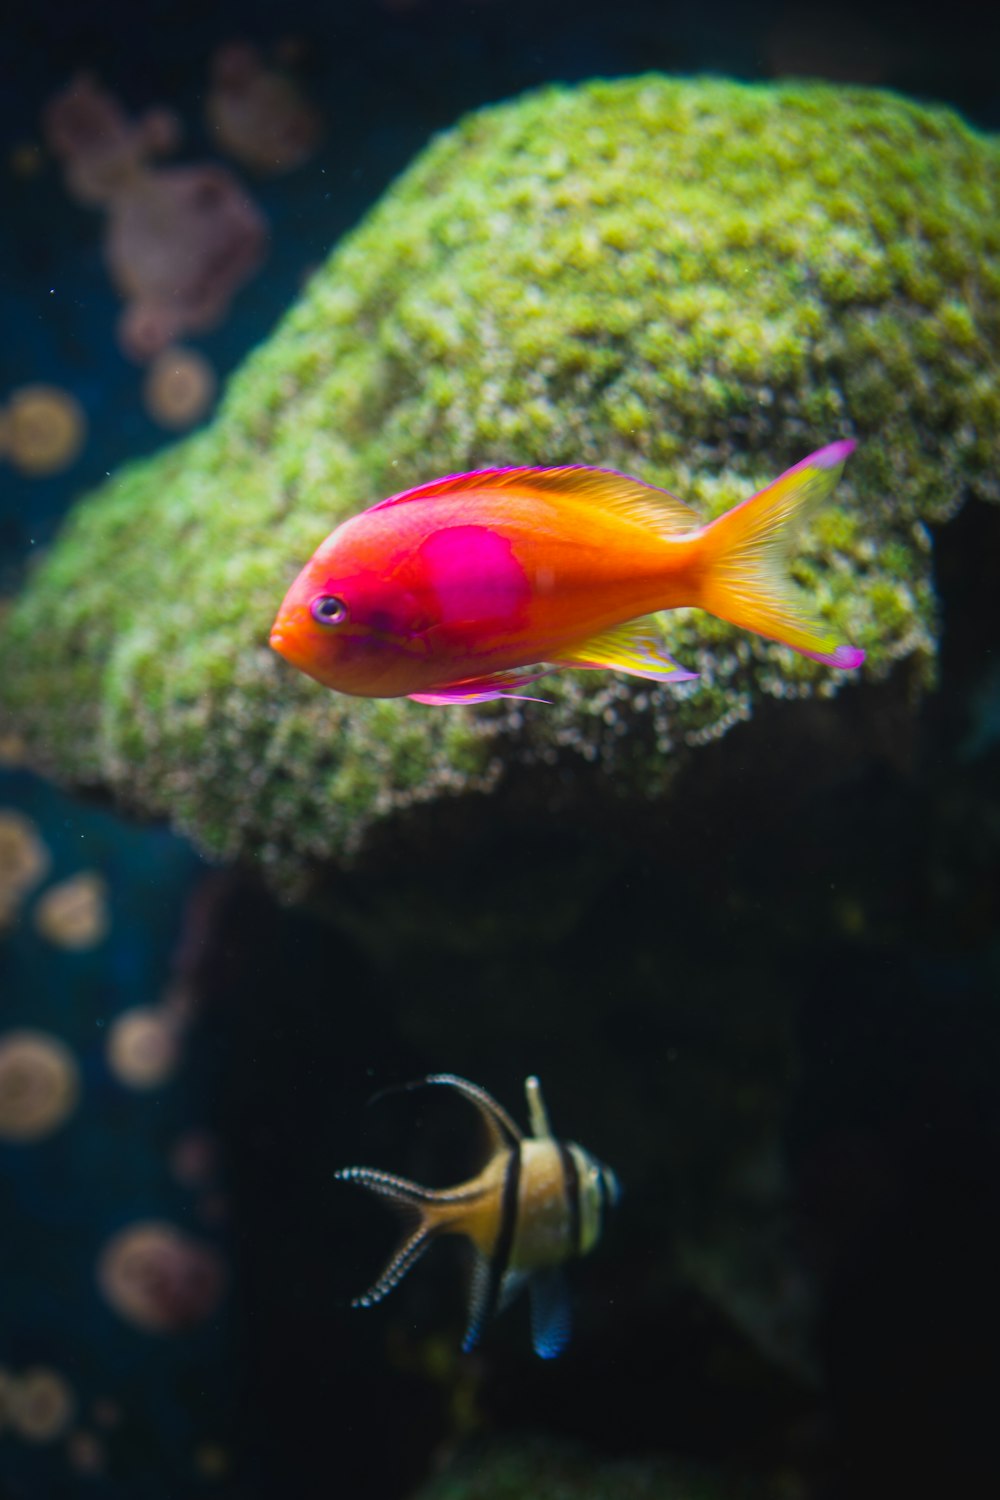 orange fish in water with green plant